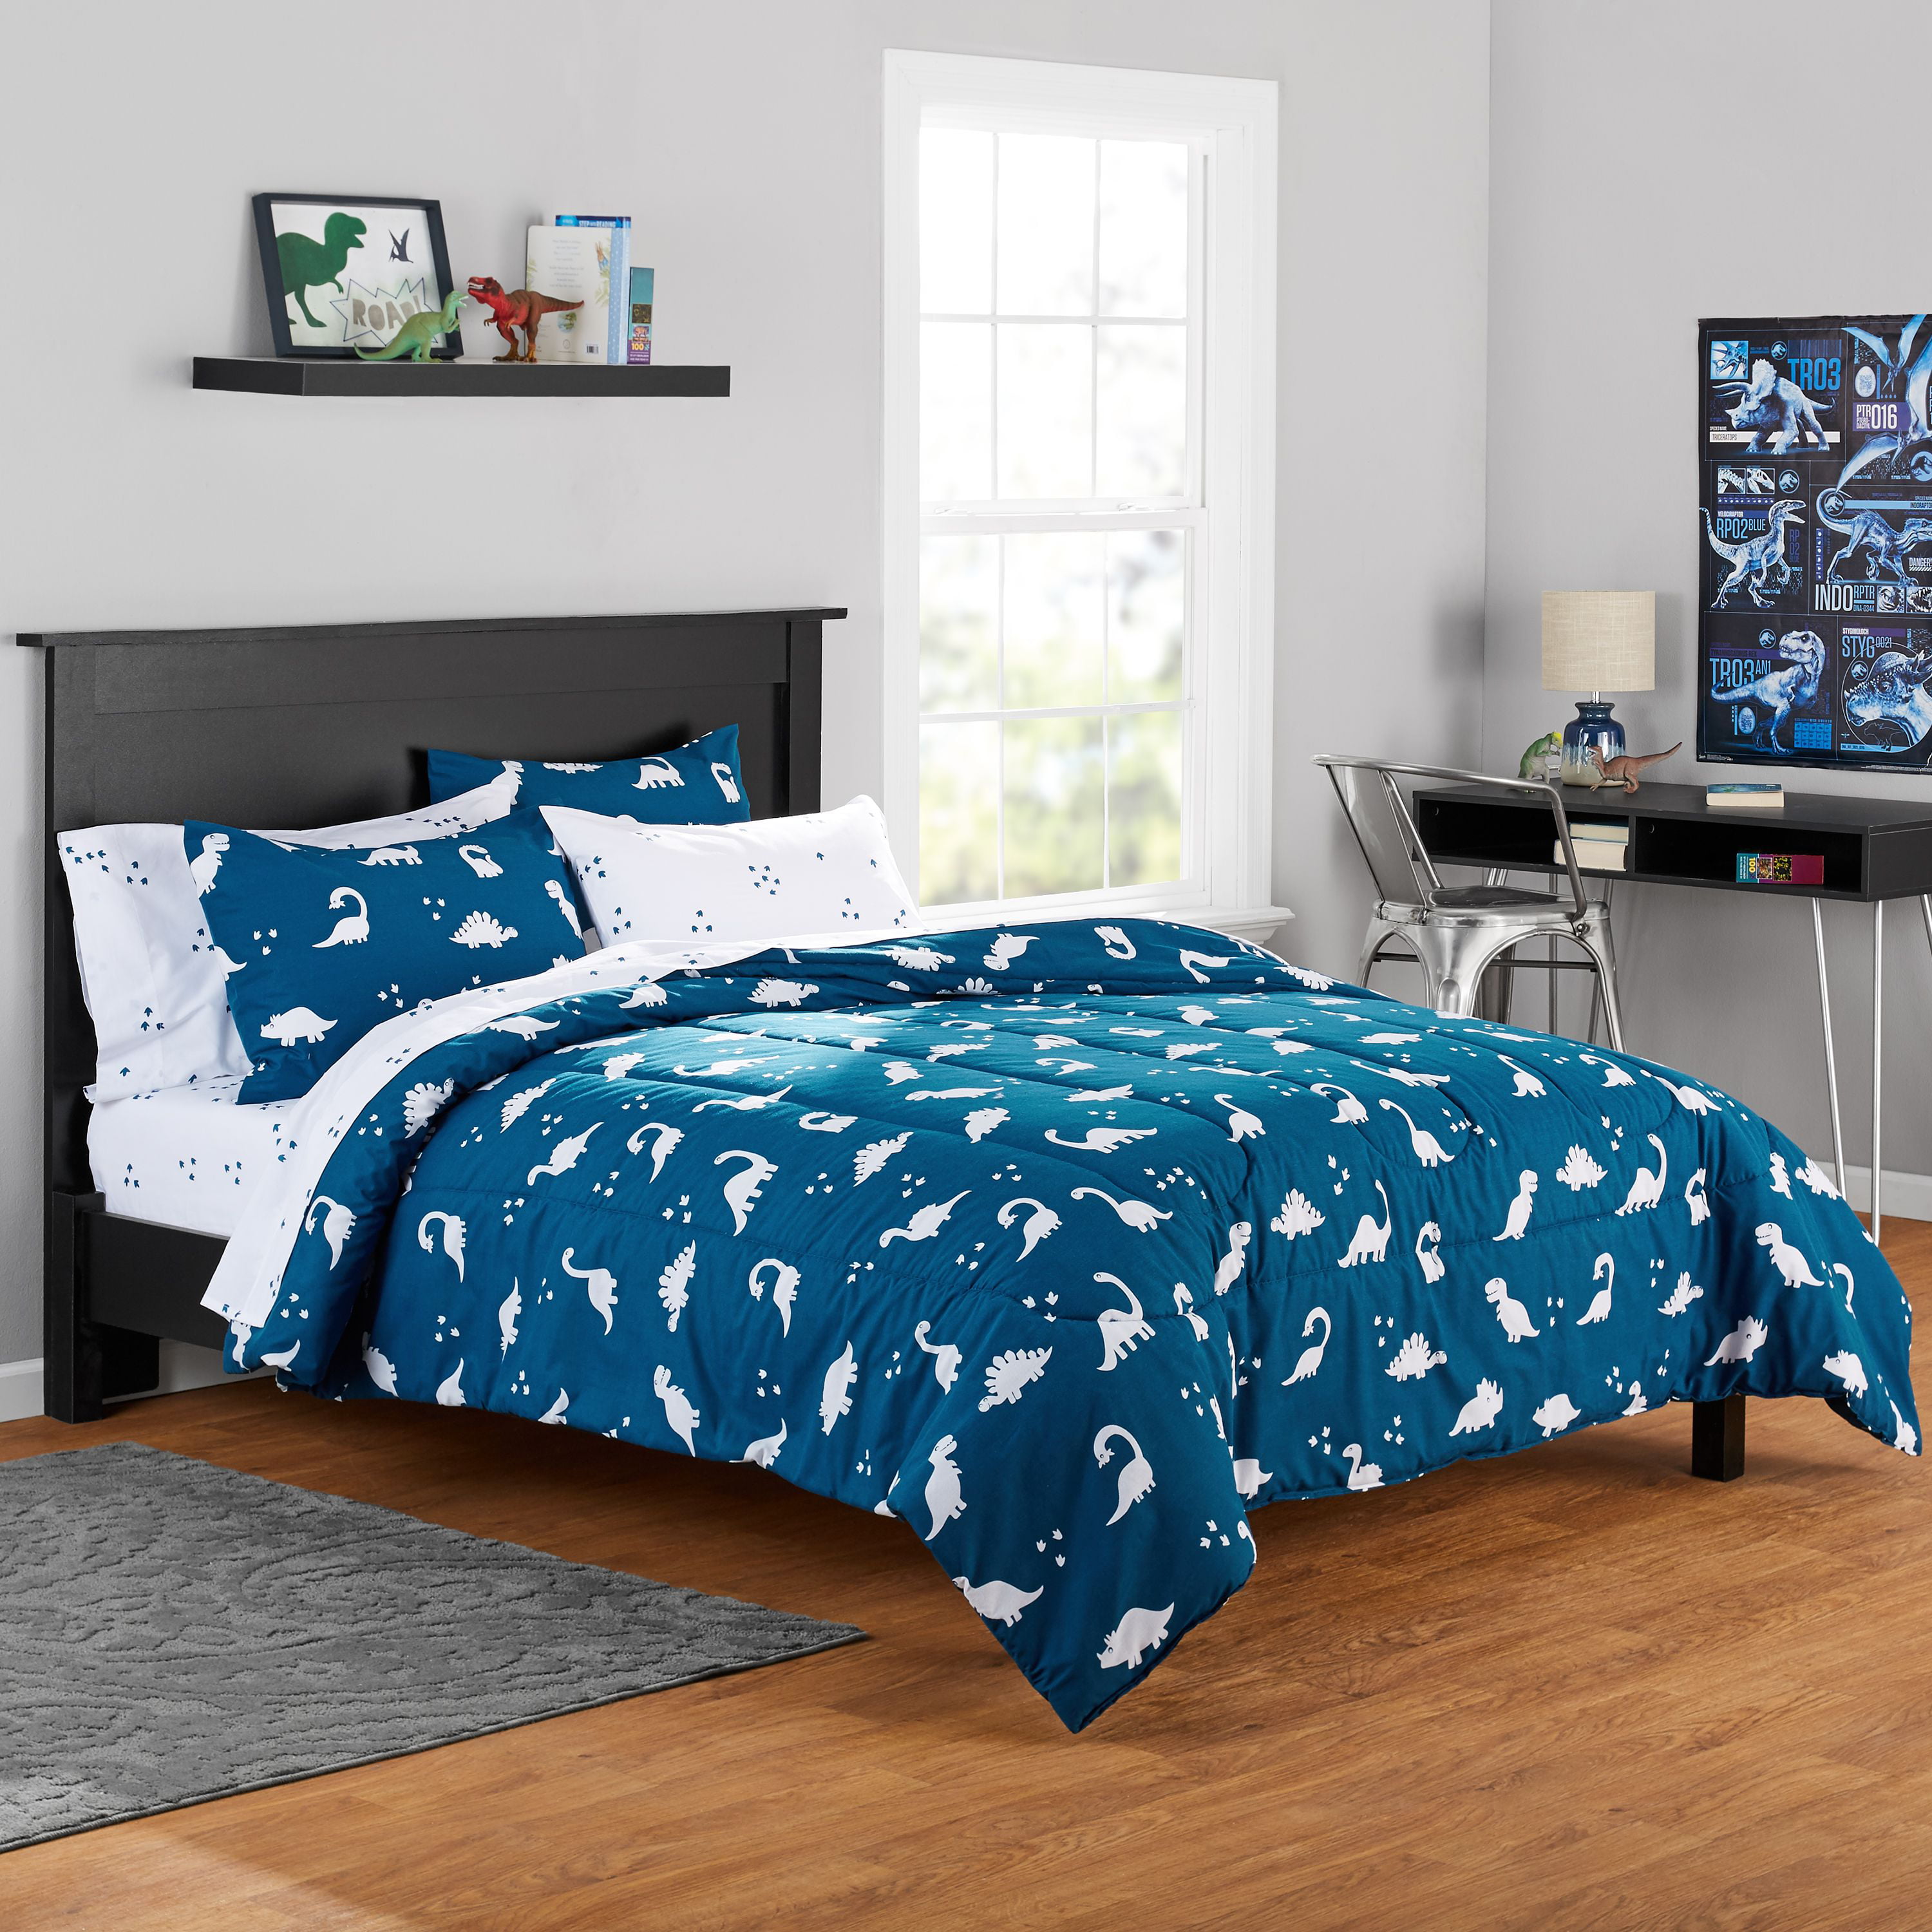 Full Size Your Zone Blue Dinosaurs Bed in a Bag Kids Bedding Set 7 Pieces 